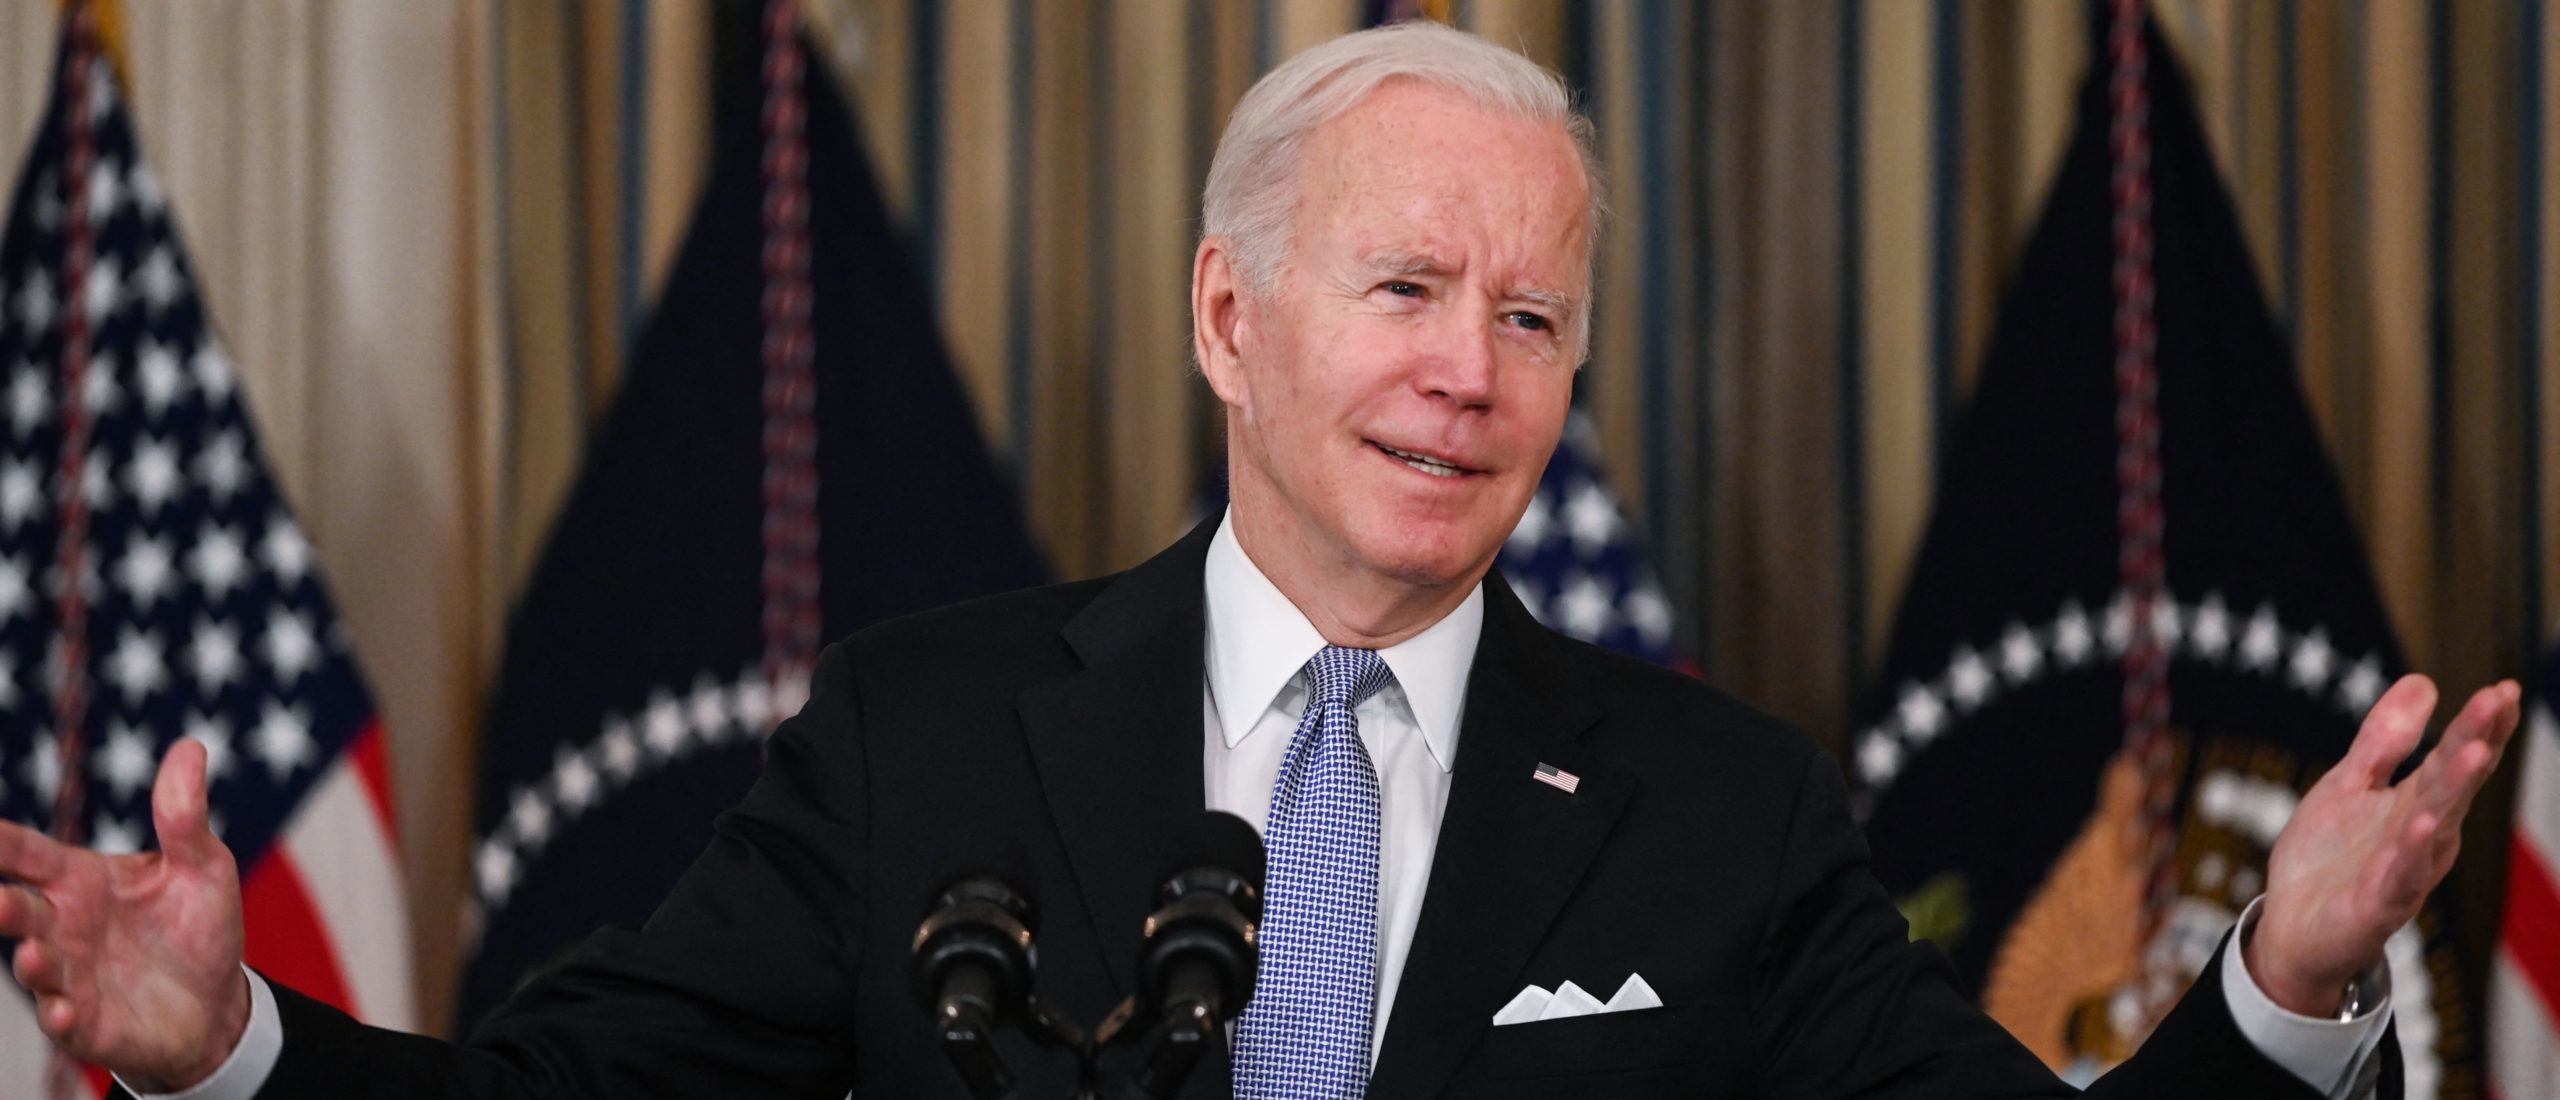 US President Joe Biden delivers remarks on the passage of the Bipartisan Infrastructure Deal and the rule that will allow the passage of the Build Back Better Act in the State Dining Room at the White House in Washington, DC on November 6, 2021. (Photo by ROBERTO SCHMIDT/AFP via Getty Images)